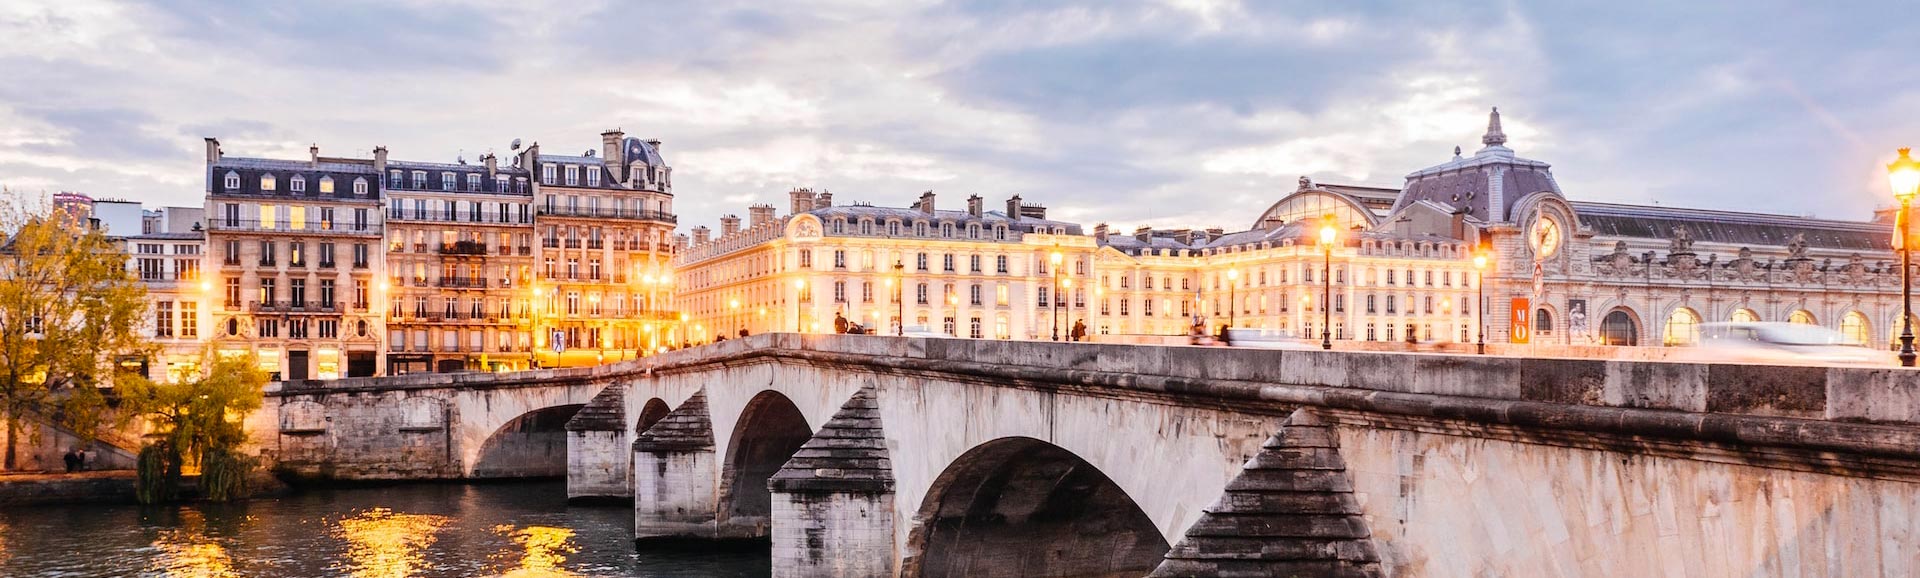 Paris buildings with bridge and river foreground